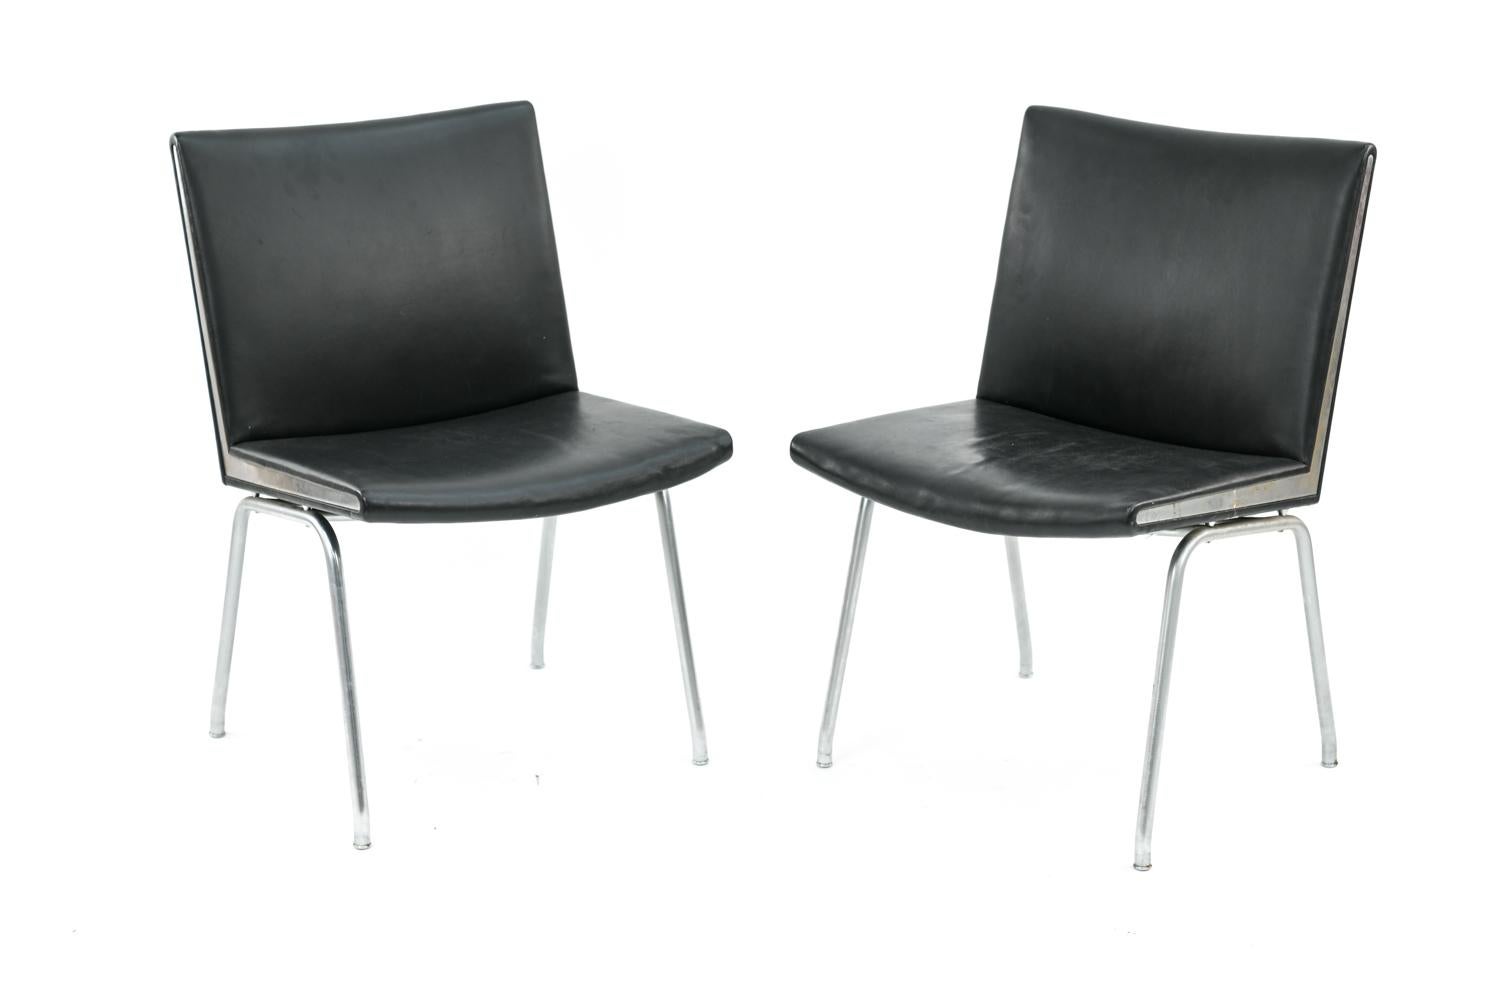 Four Airport Chairs, Model AP-38, by Hans J. Wegner and A.P. Stolen, 1960s 1